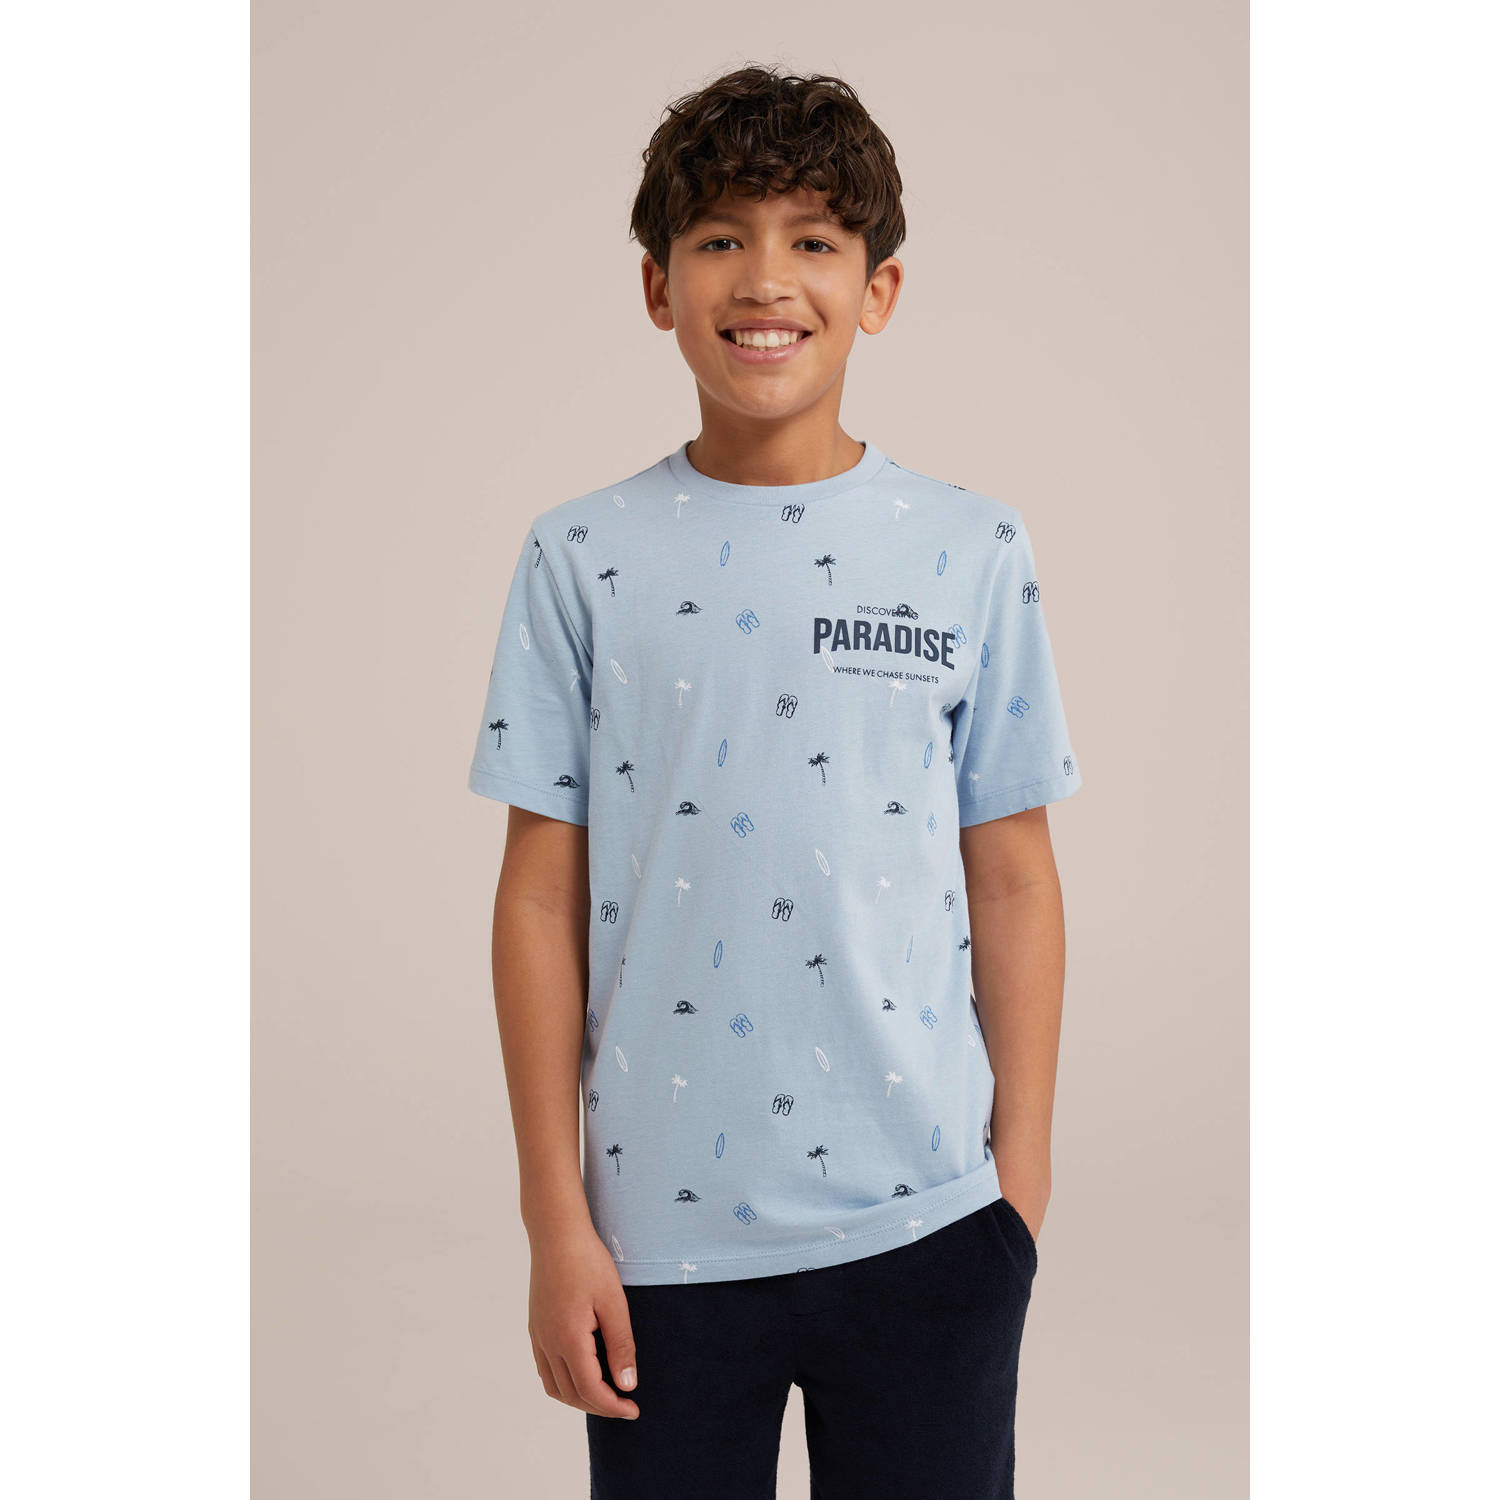 WE Fashion T-shirt met all over print blauw